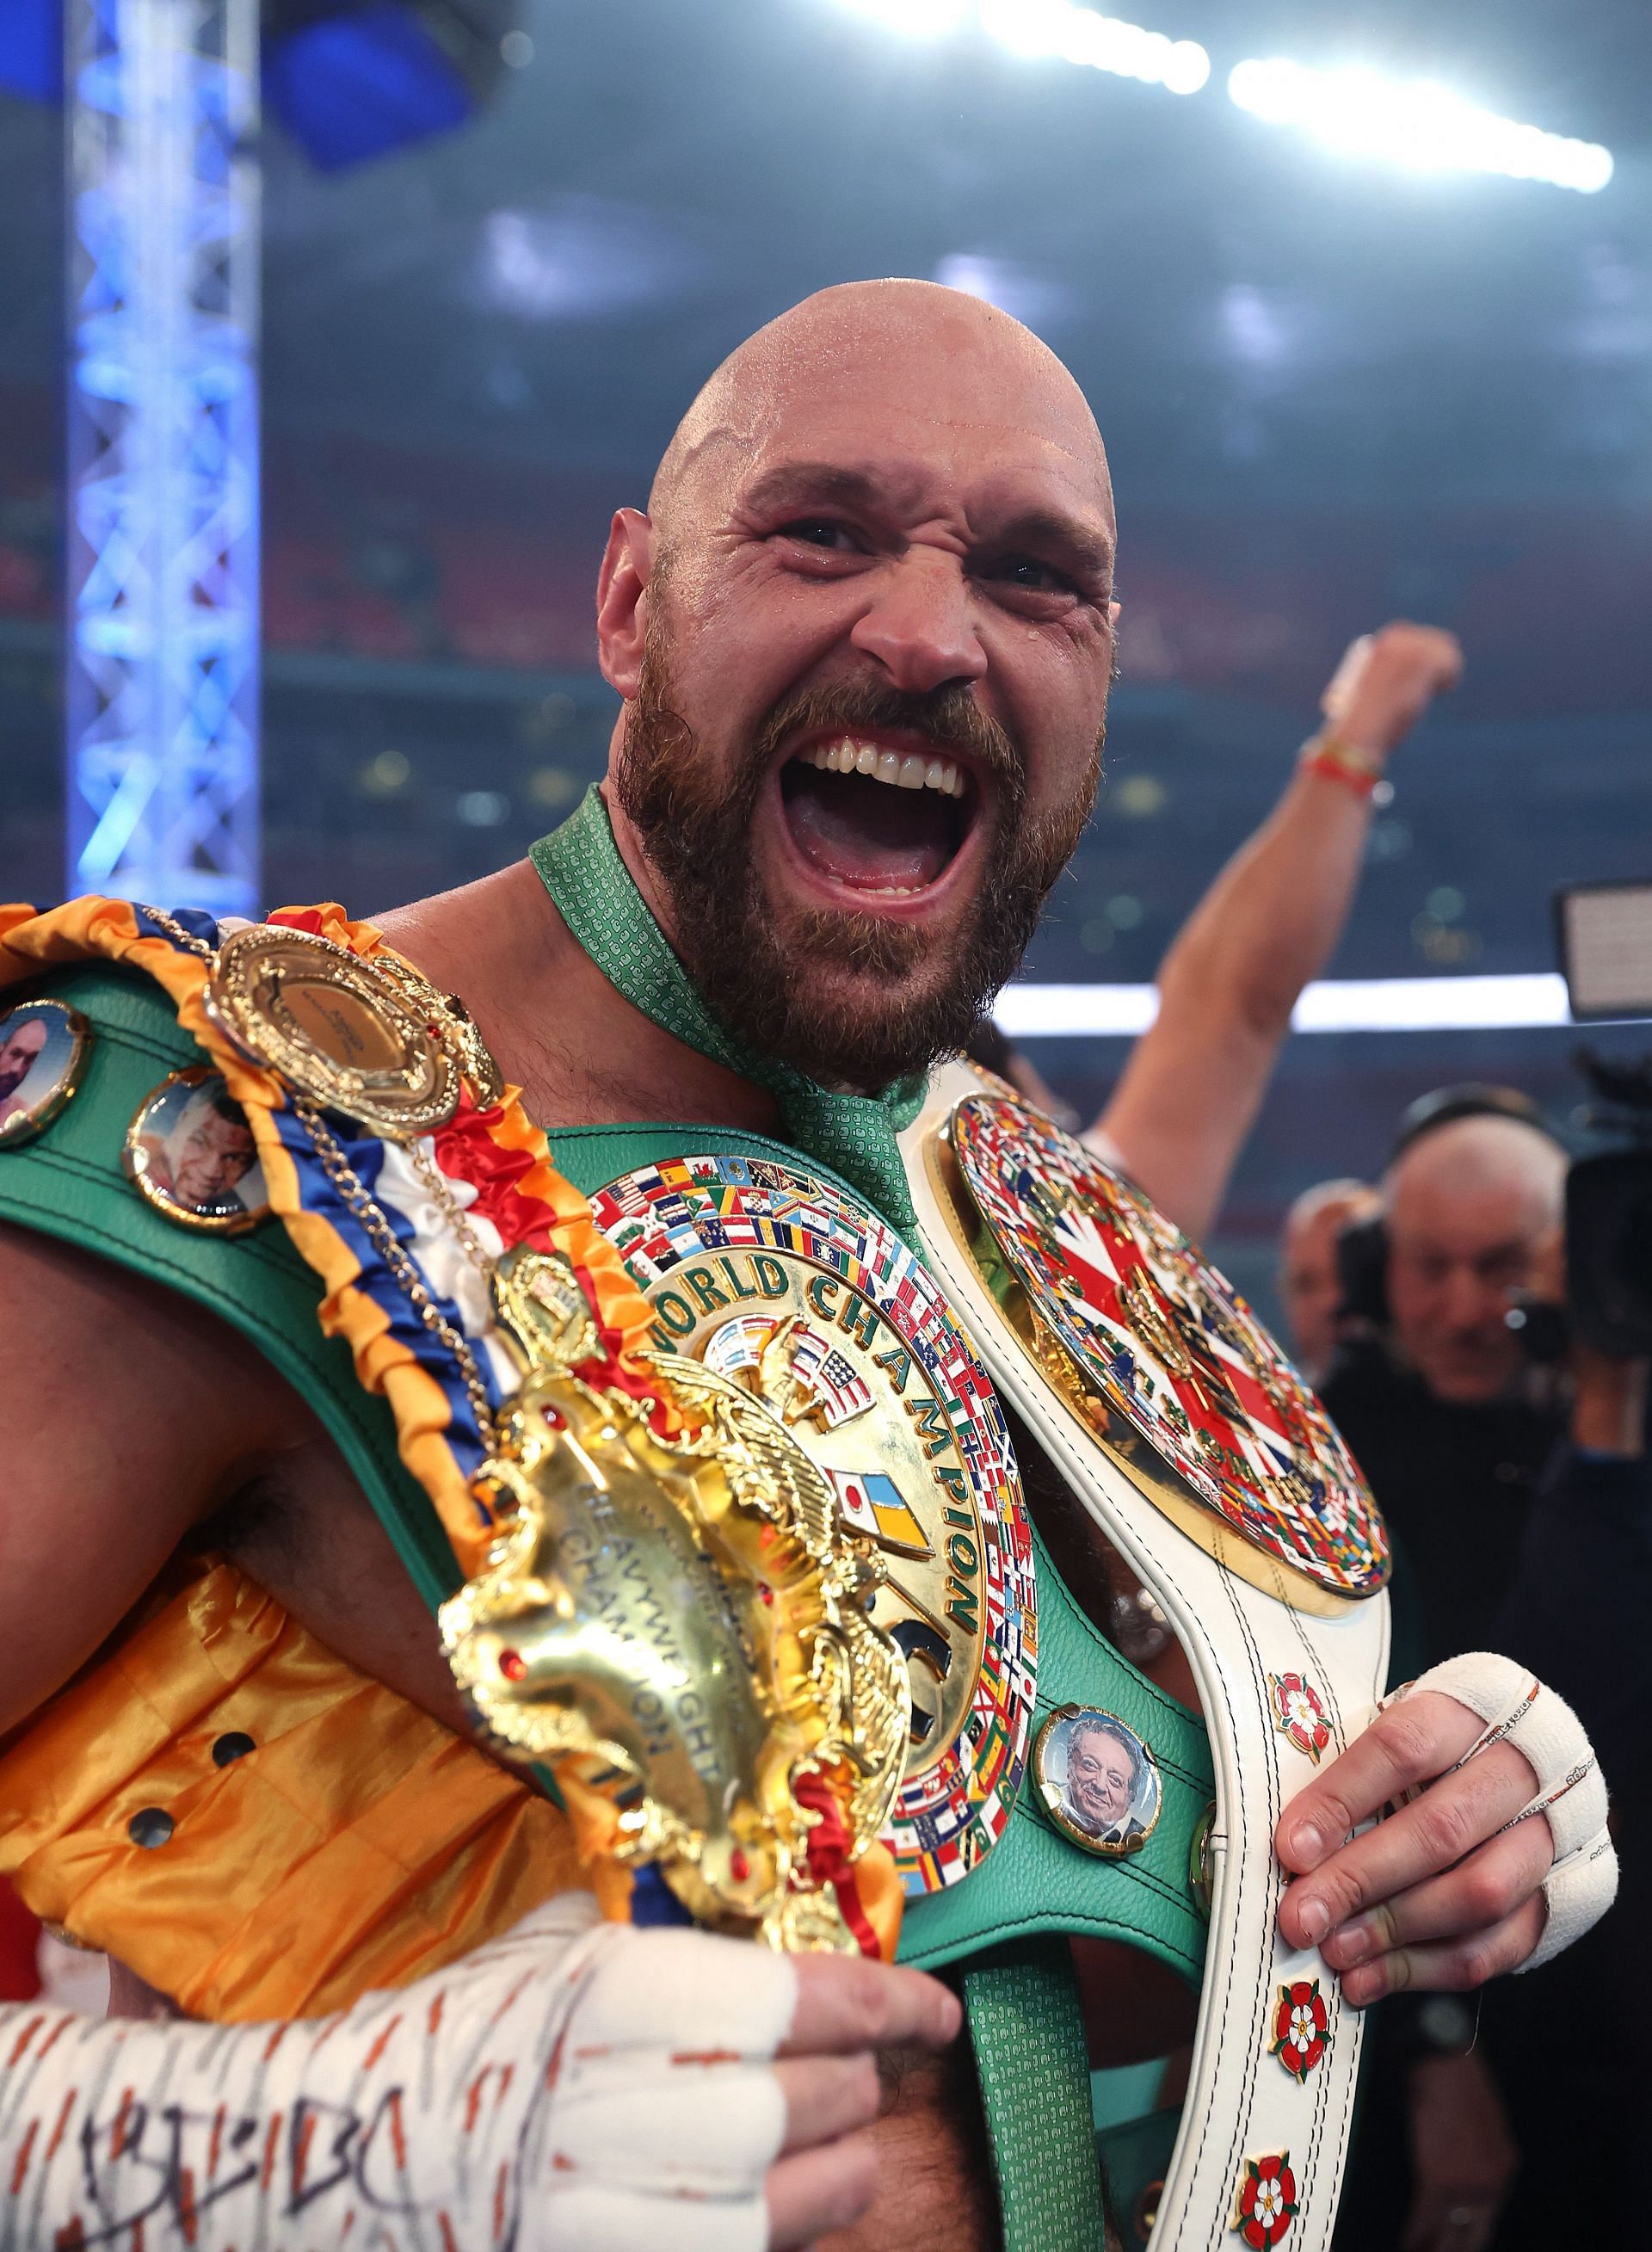 Tyson Fury celebrates after defeating Dillian Whyte.